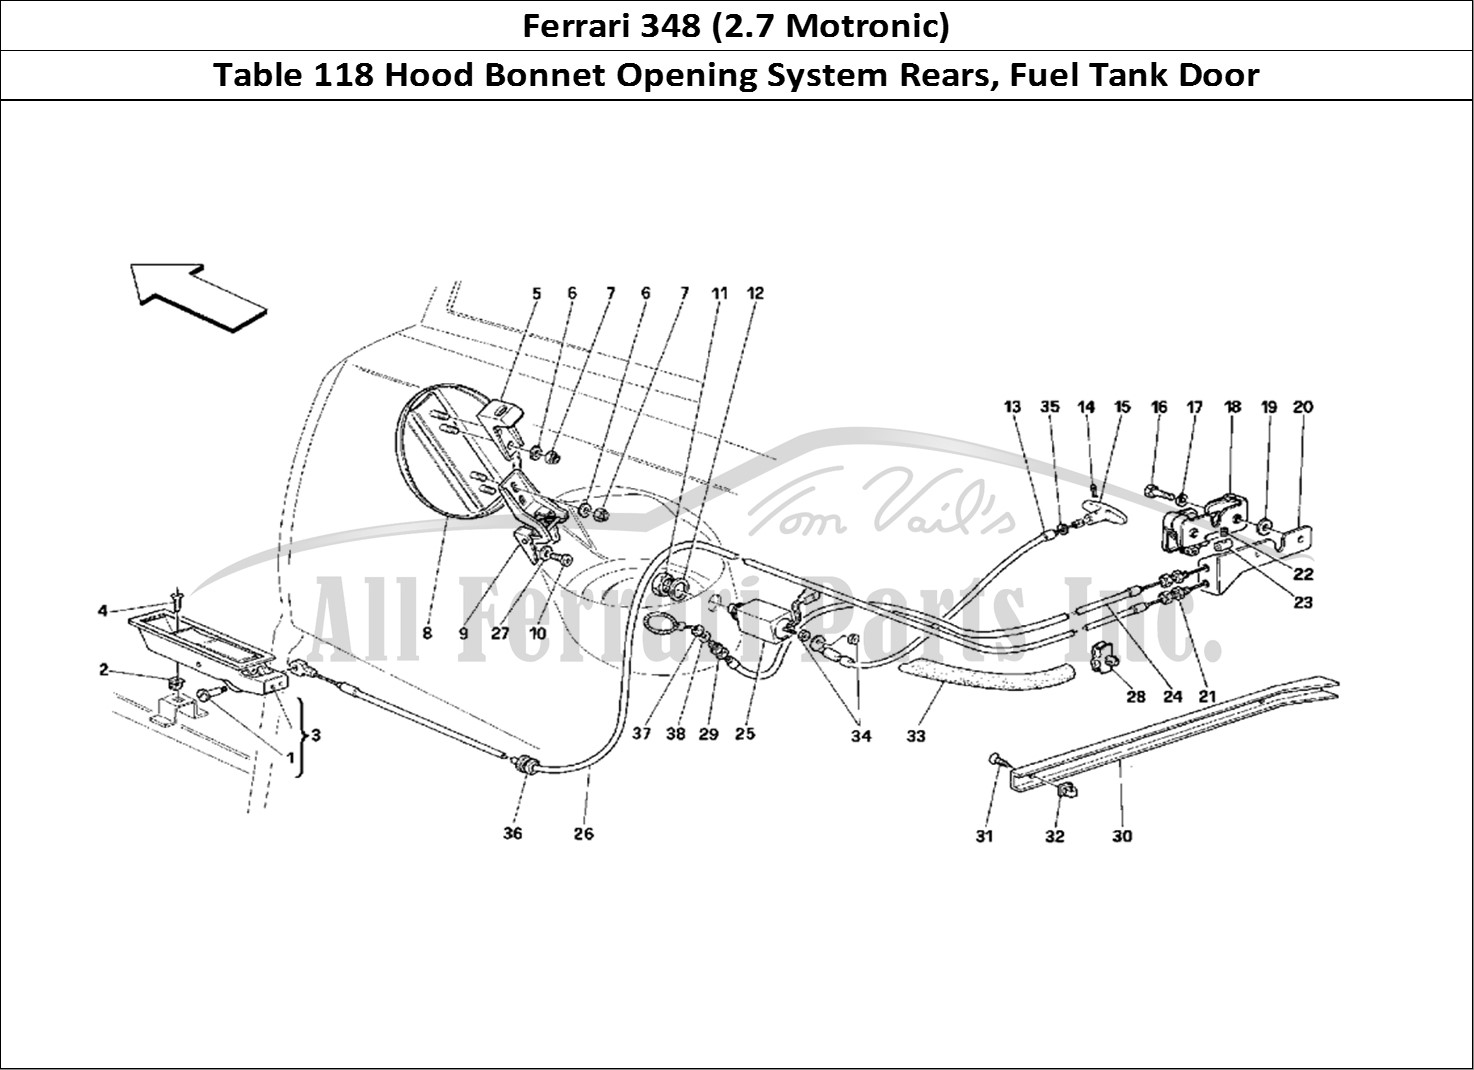 Ferrari Parts Ferrari 348 (2.7 Motronic) Page 118 Opening Devices for Rear